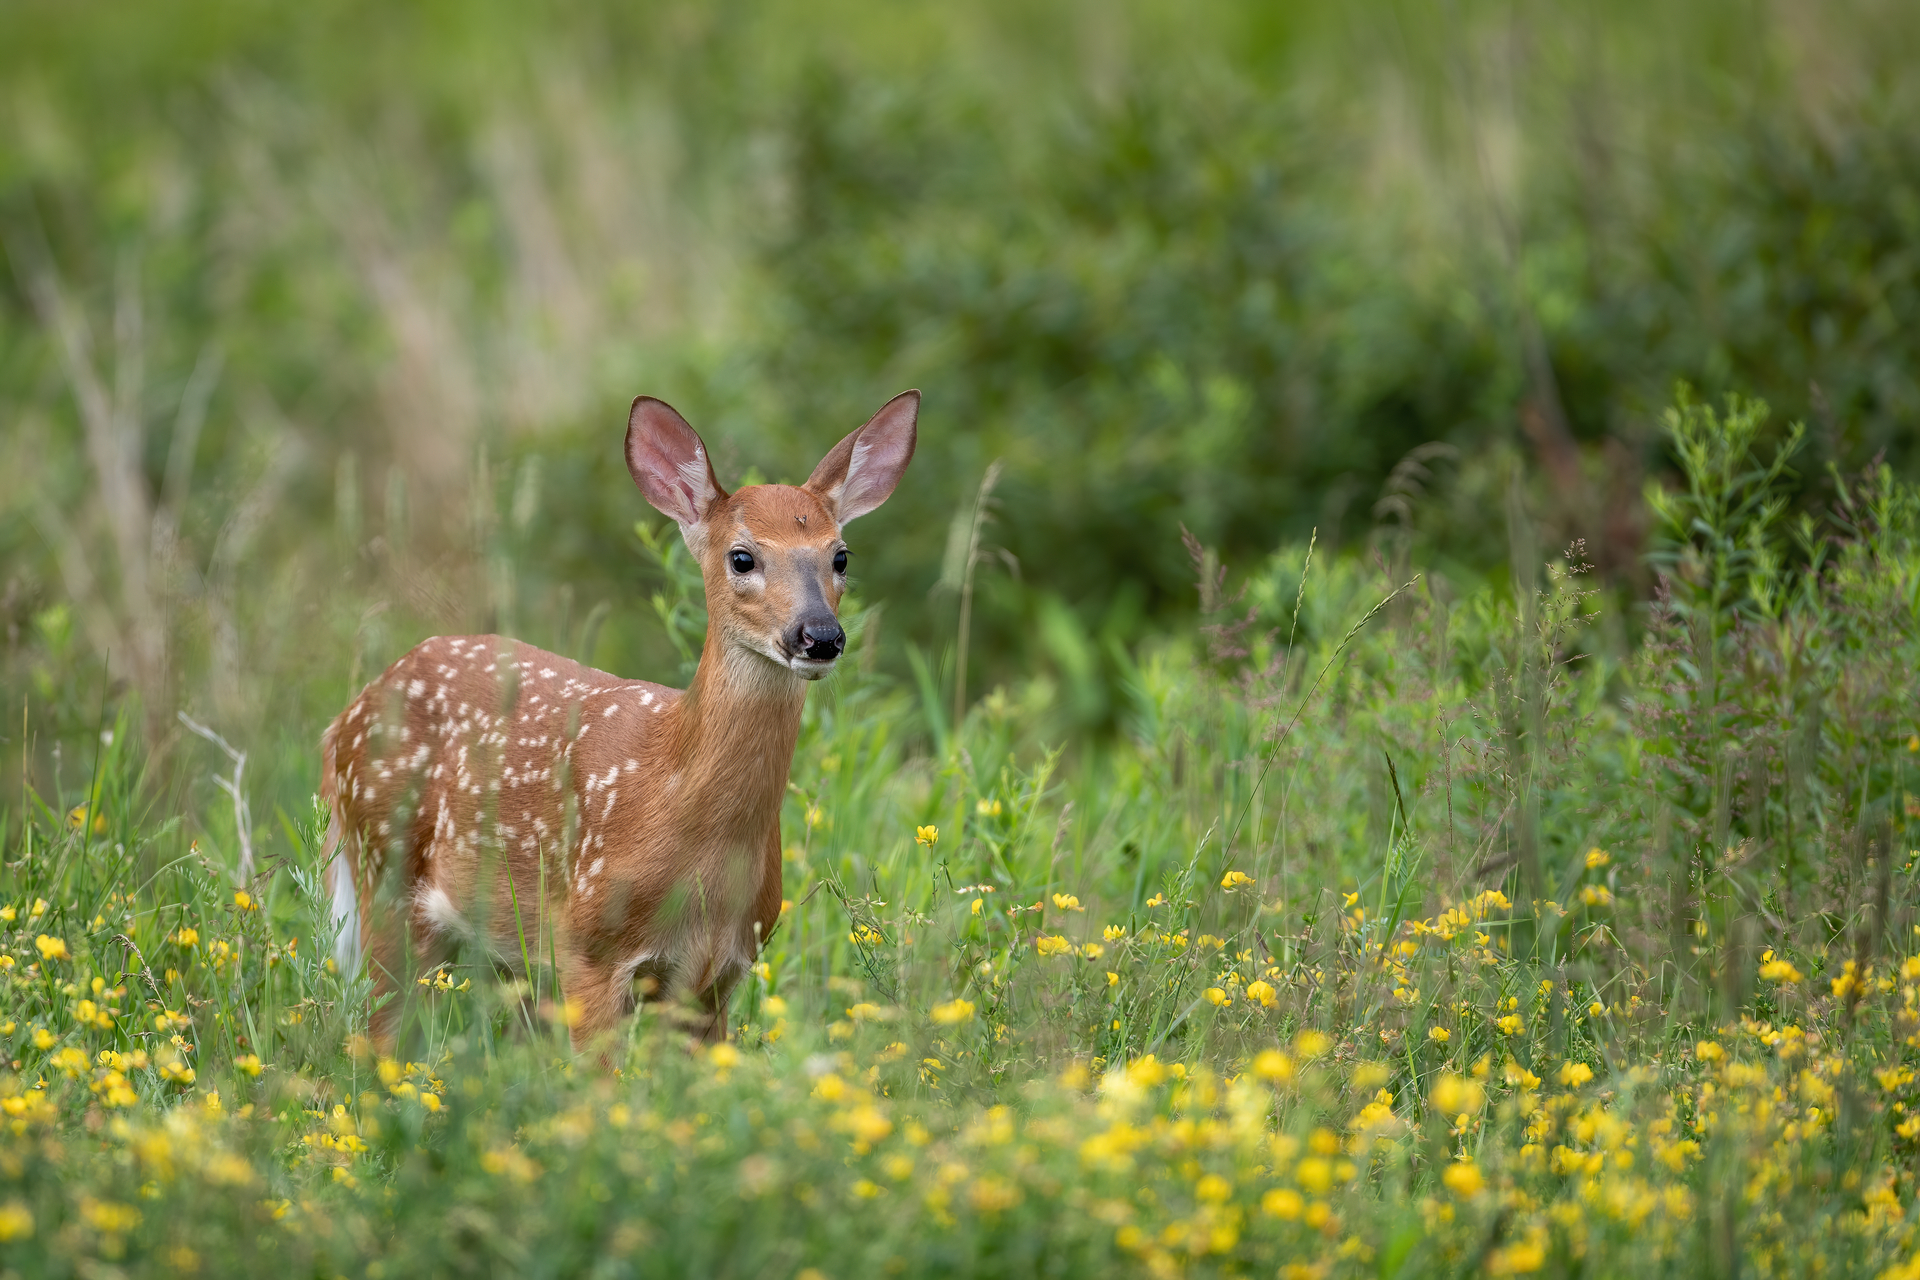 A baby deer with white dots on its back standing in a meadow with yellow flowers.